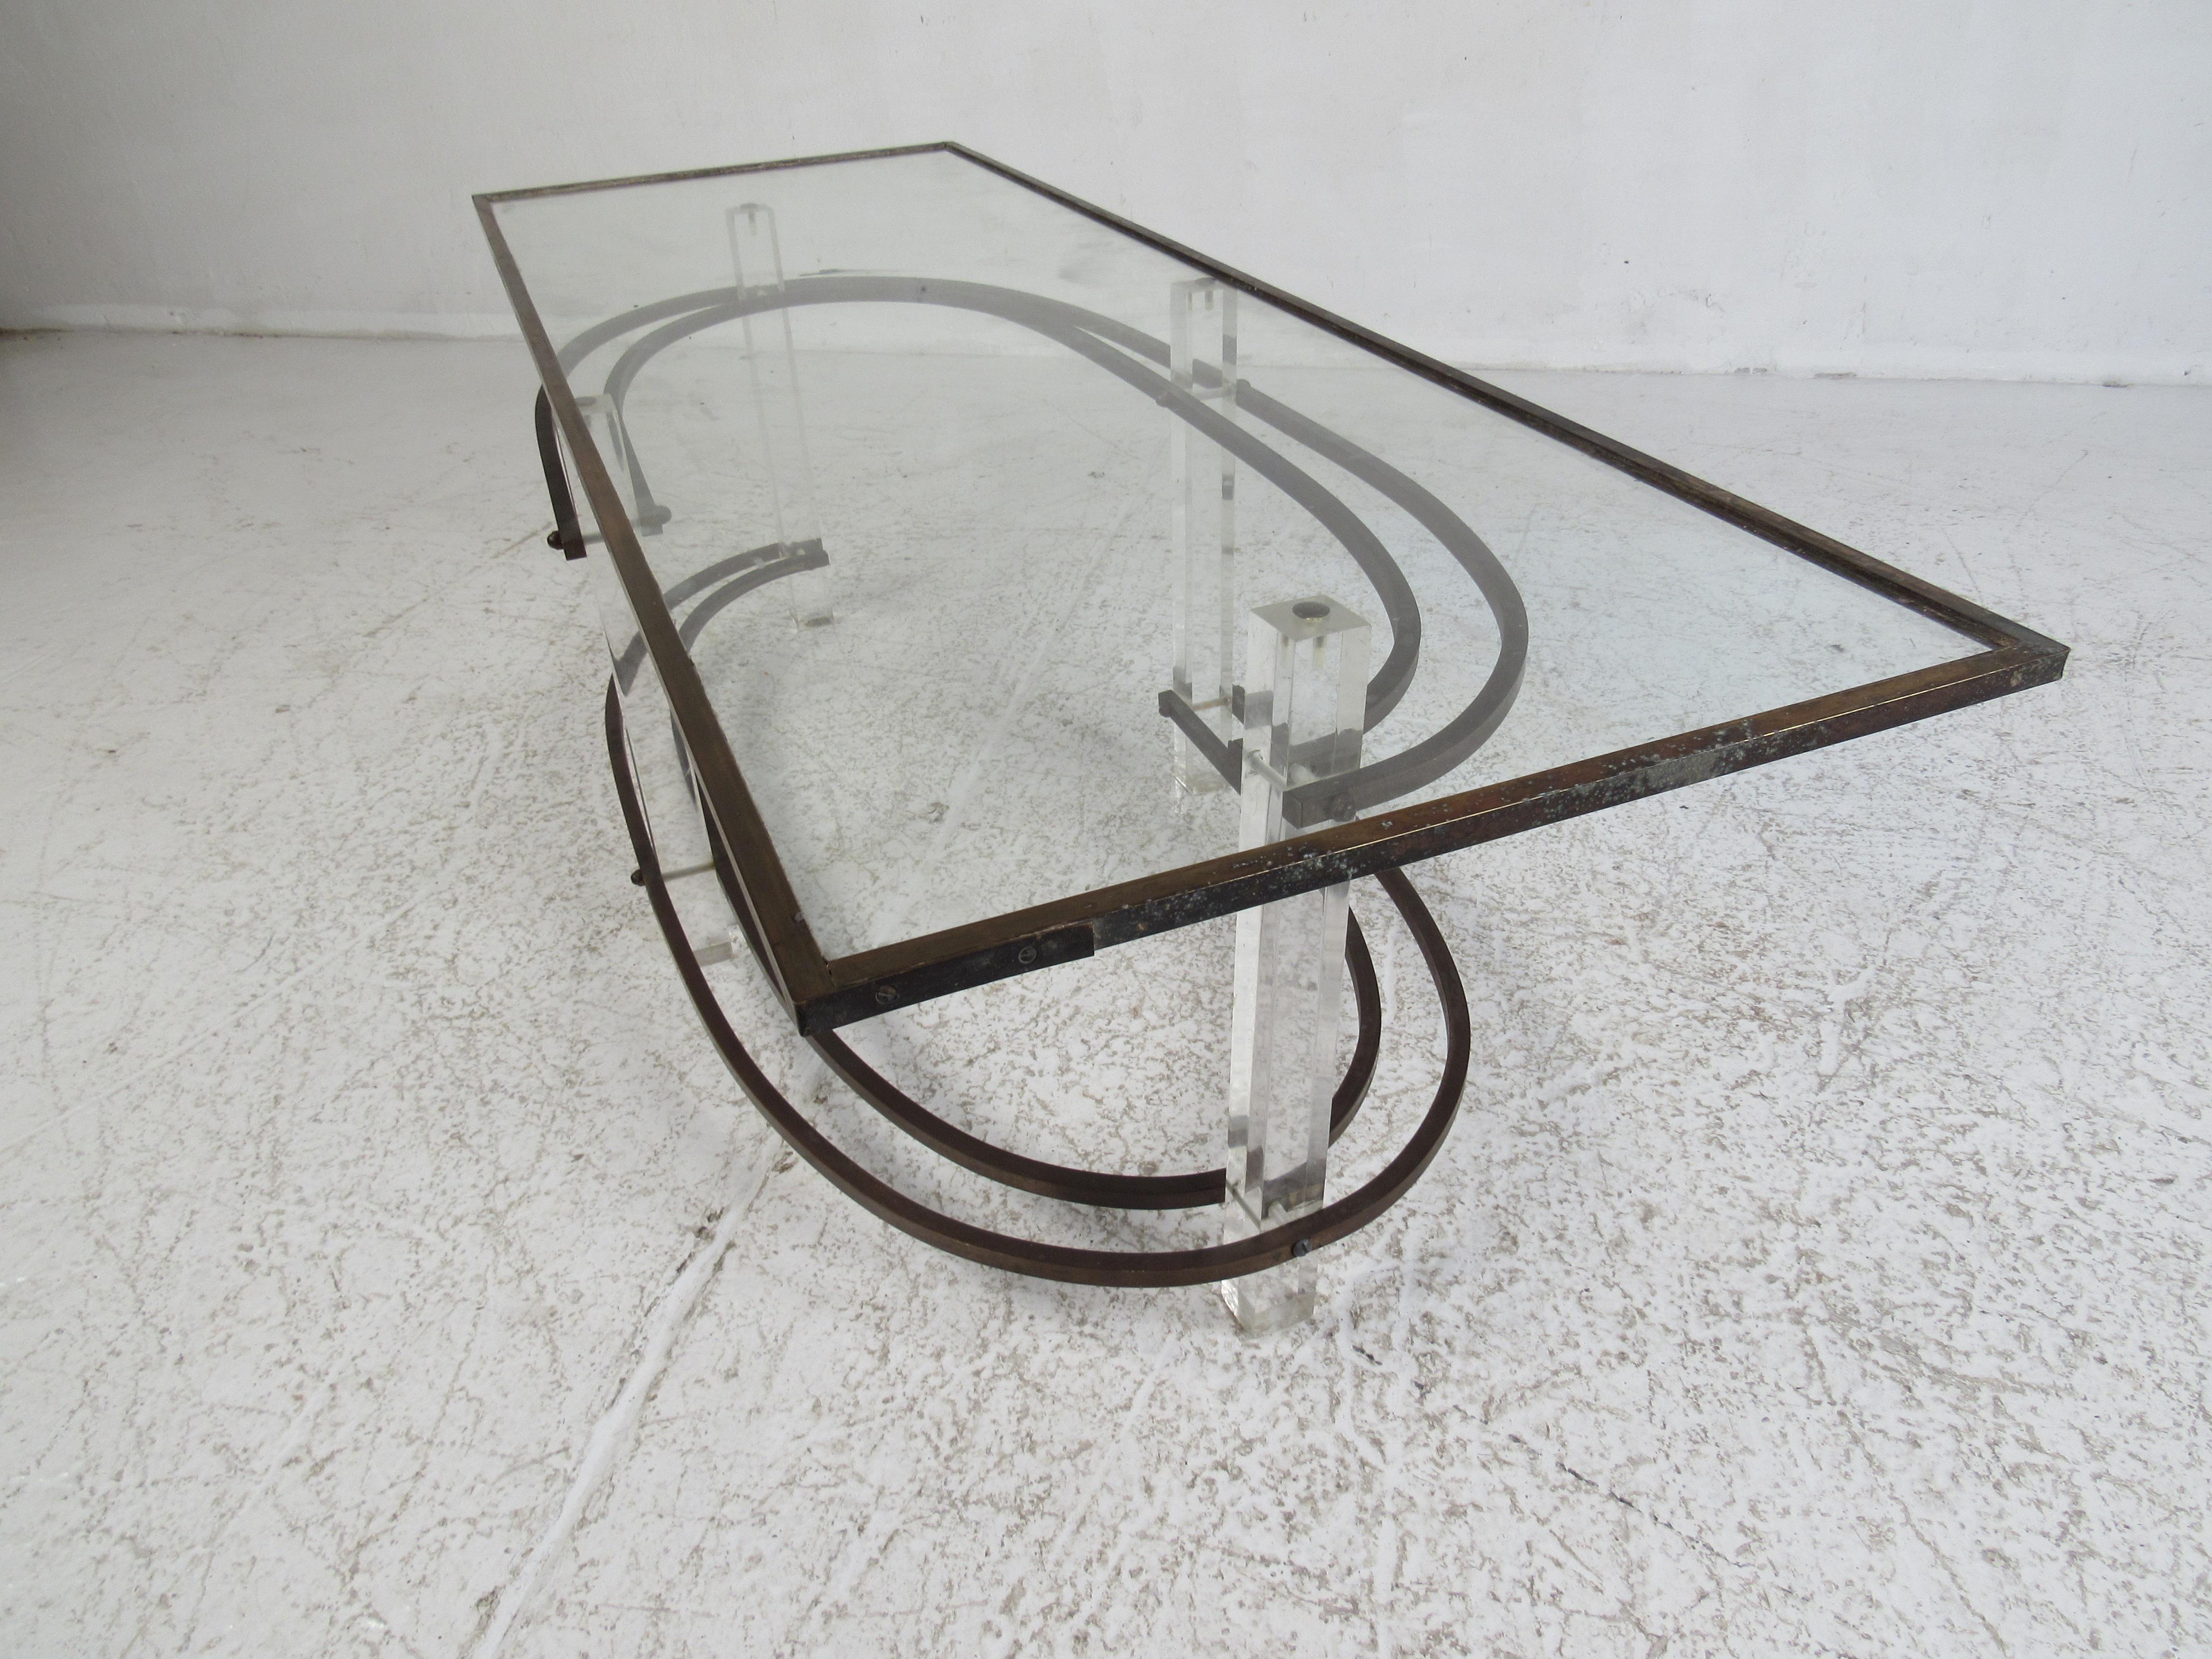 An elegant Mid-Century Modern coffee table designed in the style of Charles Hollis Jones. A unique base with swirling brass supports that stagger and connect to the cubed Lucite legs. A rectangular glass top within a brass and acrylic frame. This